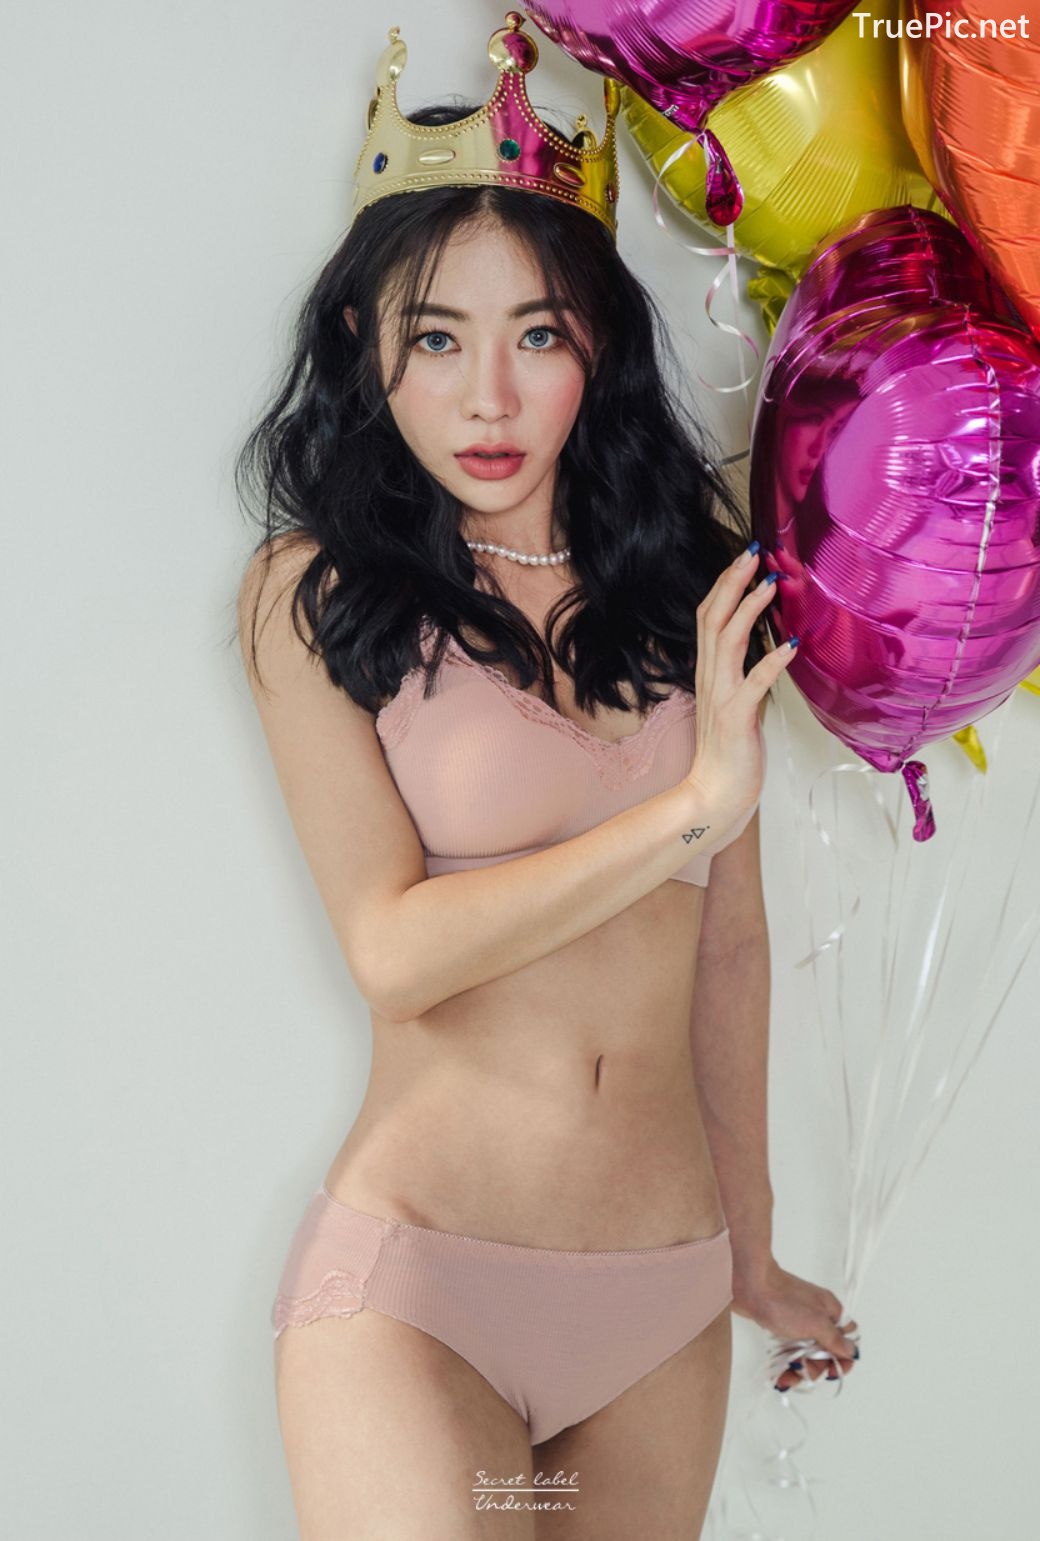 Image-Korean-Fashion-Model-An-Seo-Rin-7-Lingerie-Set-For-A-Week-TruePic.net- Picture-43